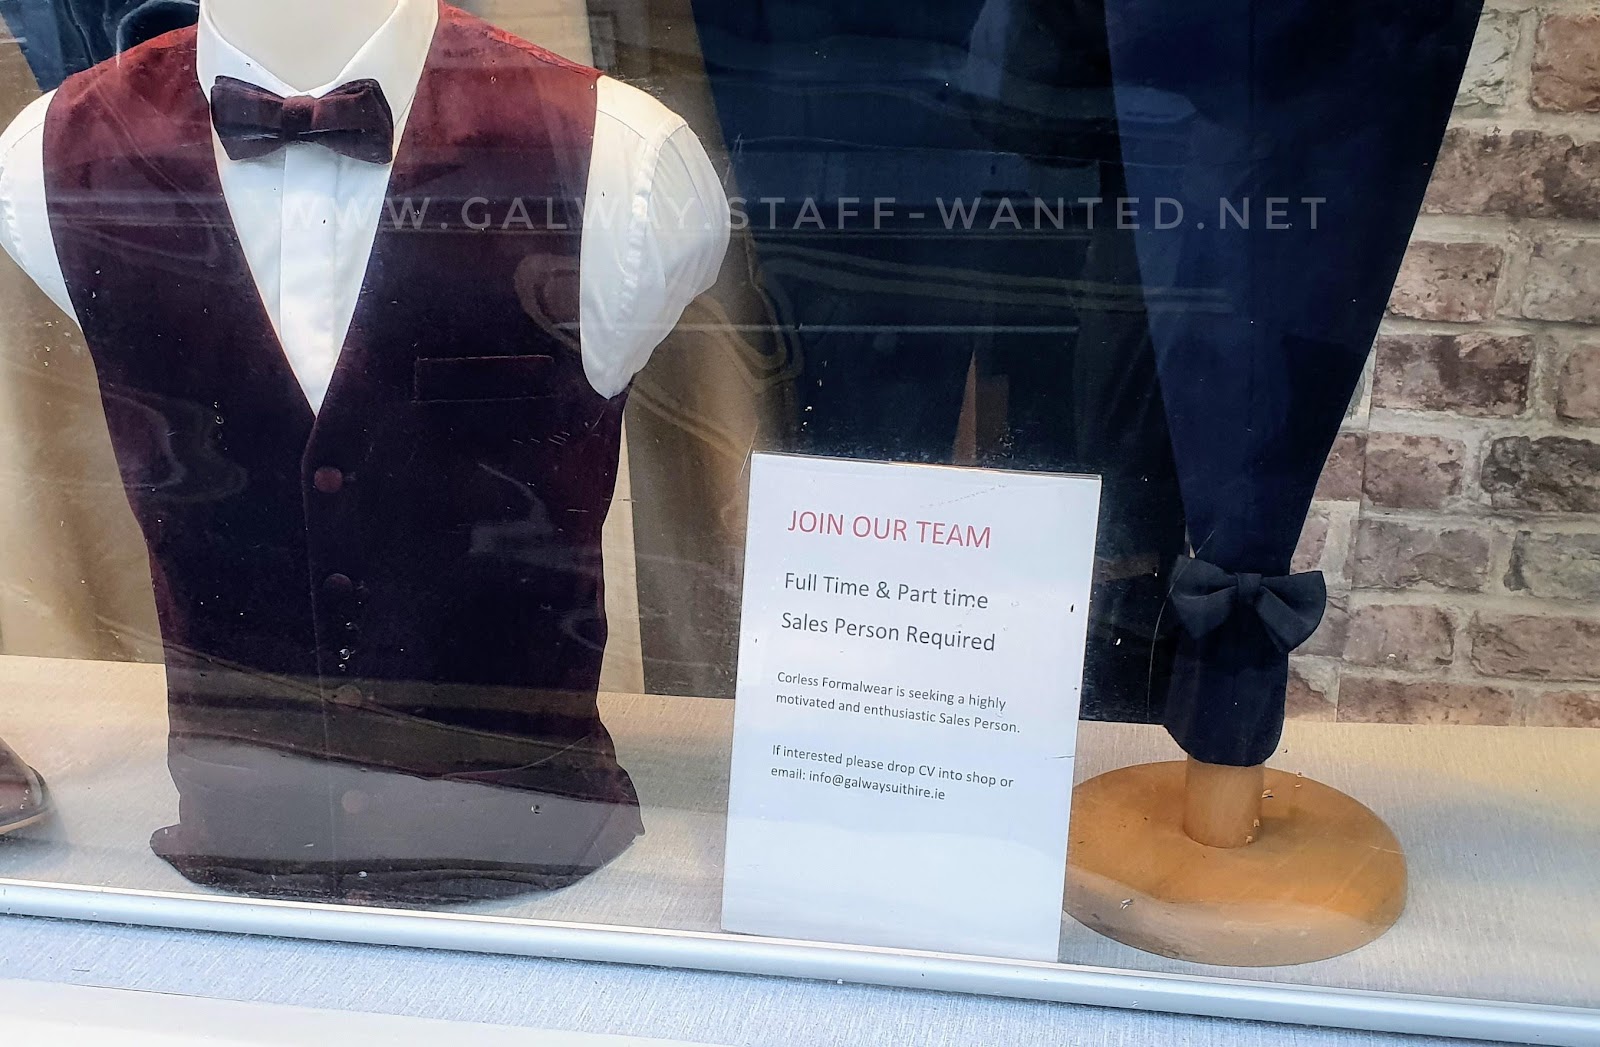 Mens formalwear shop window - manequin with maroon waistcoat, matching bow tie and white shirt - beside a staff-wanted advertisement